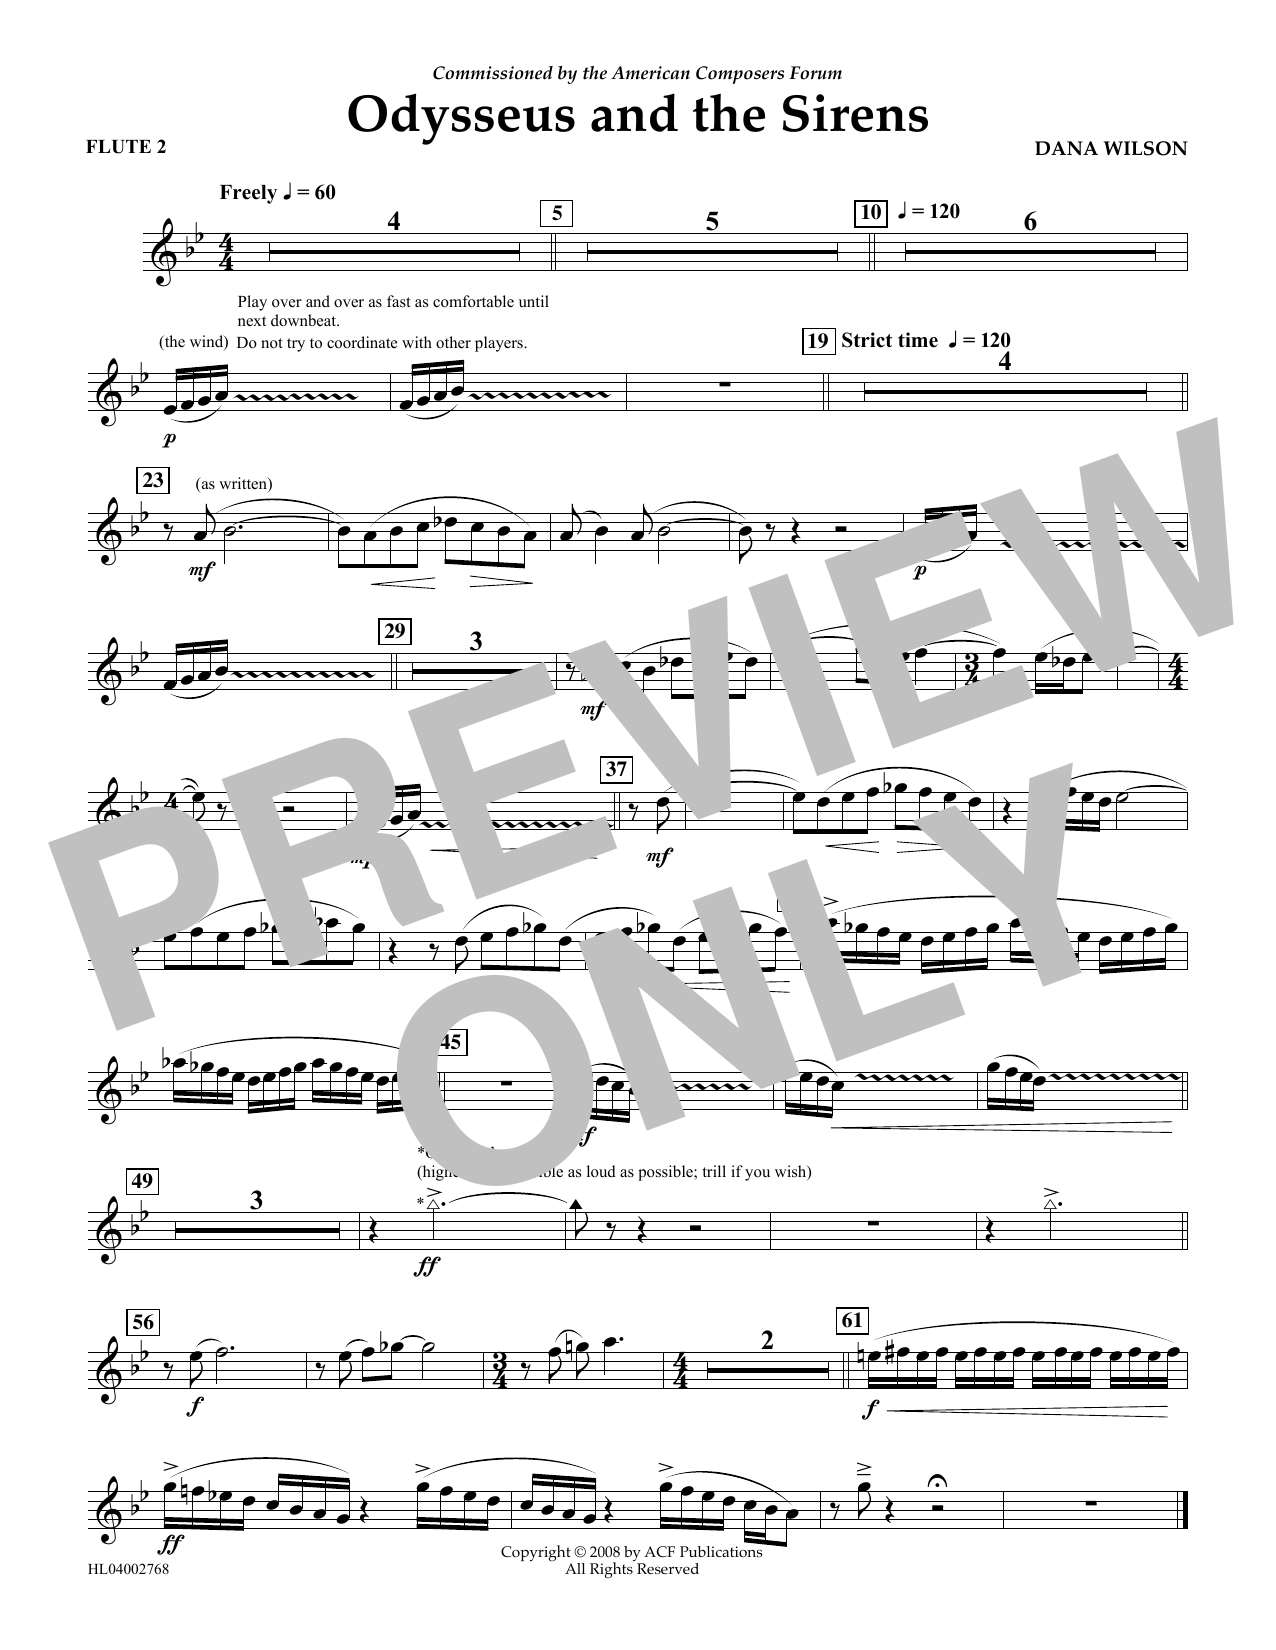 Download Dana Wilson Odysseus and the Sirens - Flute 2 Sheet Music